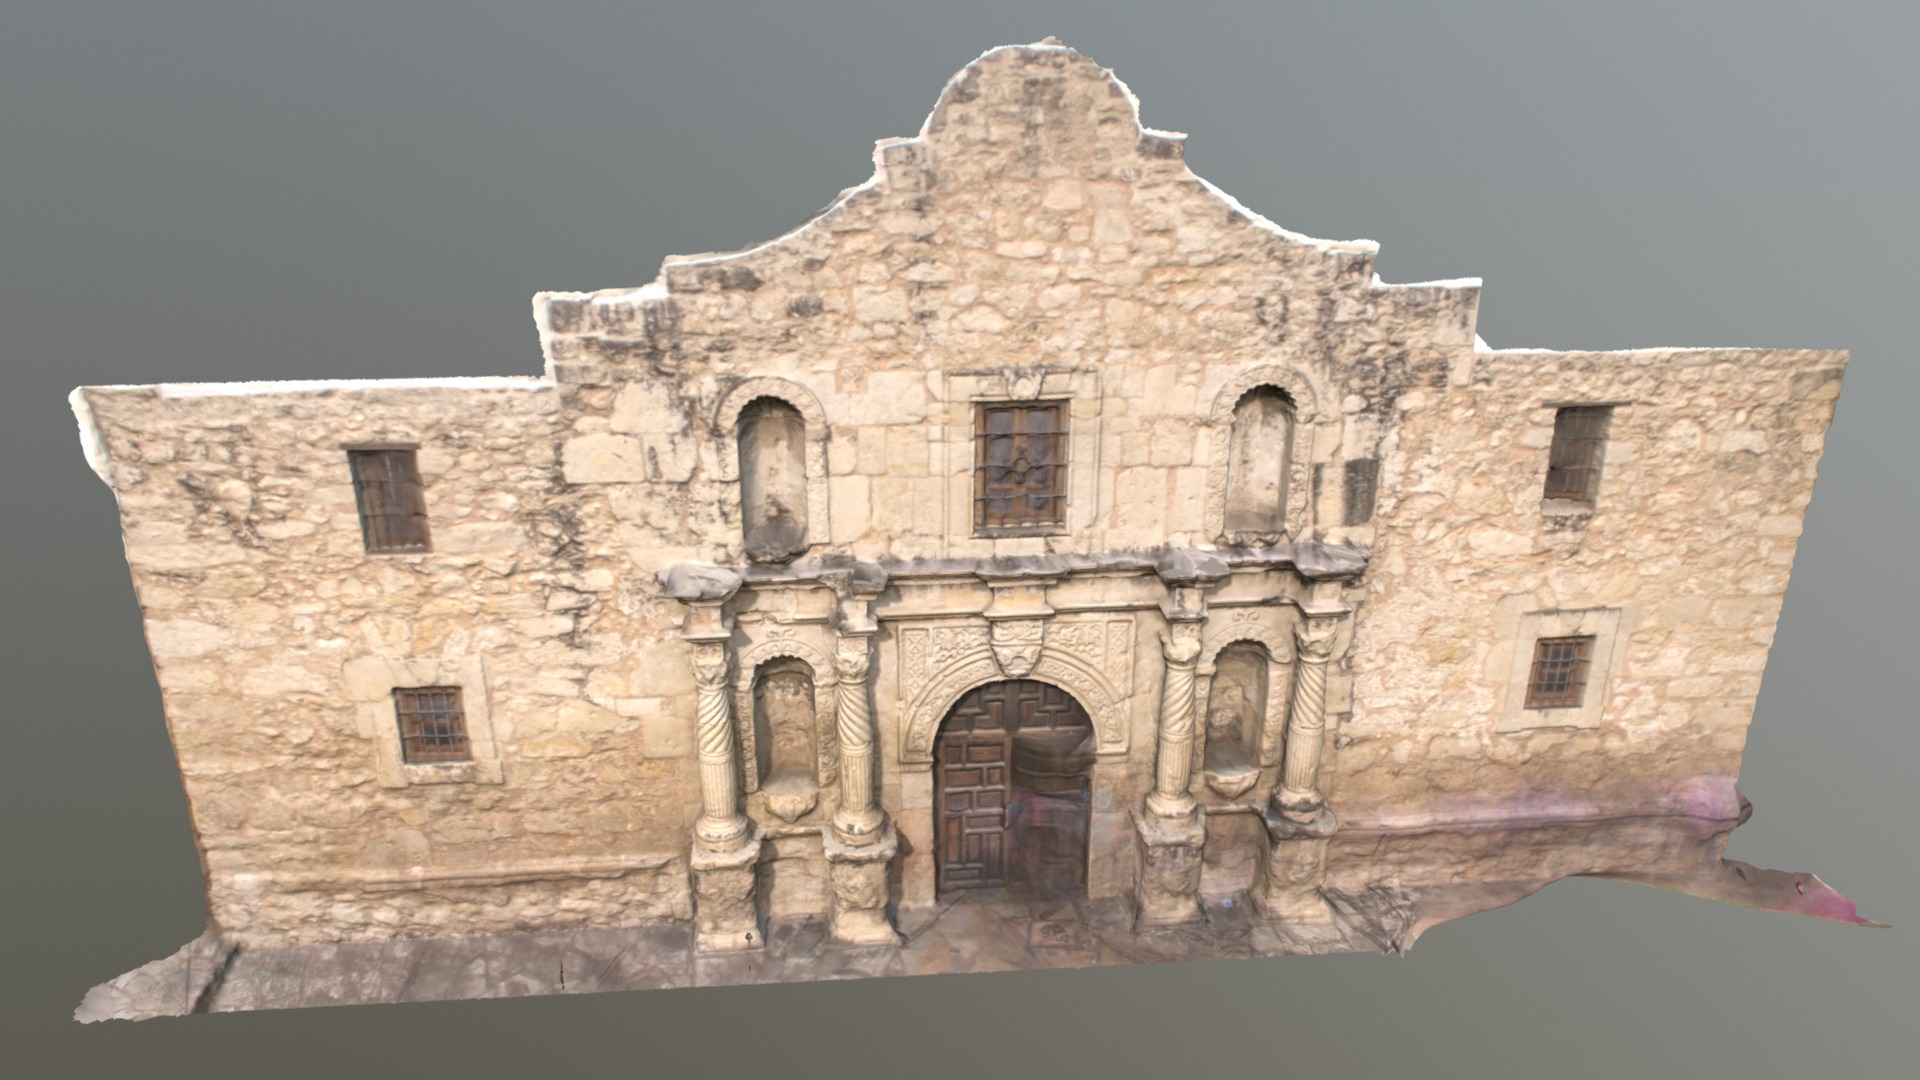 3D model Alamo-front - This is a 3D model of the Alamo-front. The 3D model is about a stone building with a large archway with Alamo Mission in San Antonio in the background.